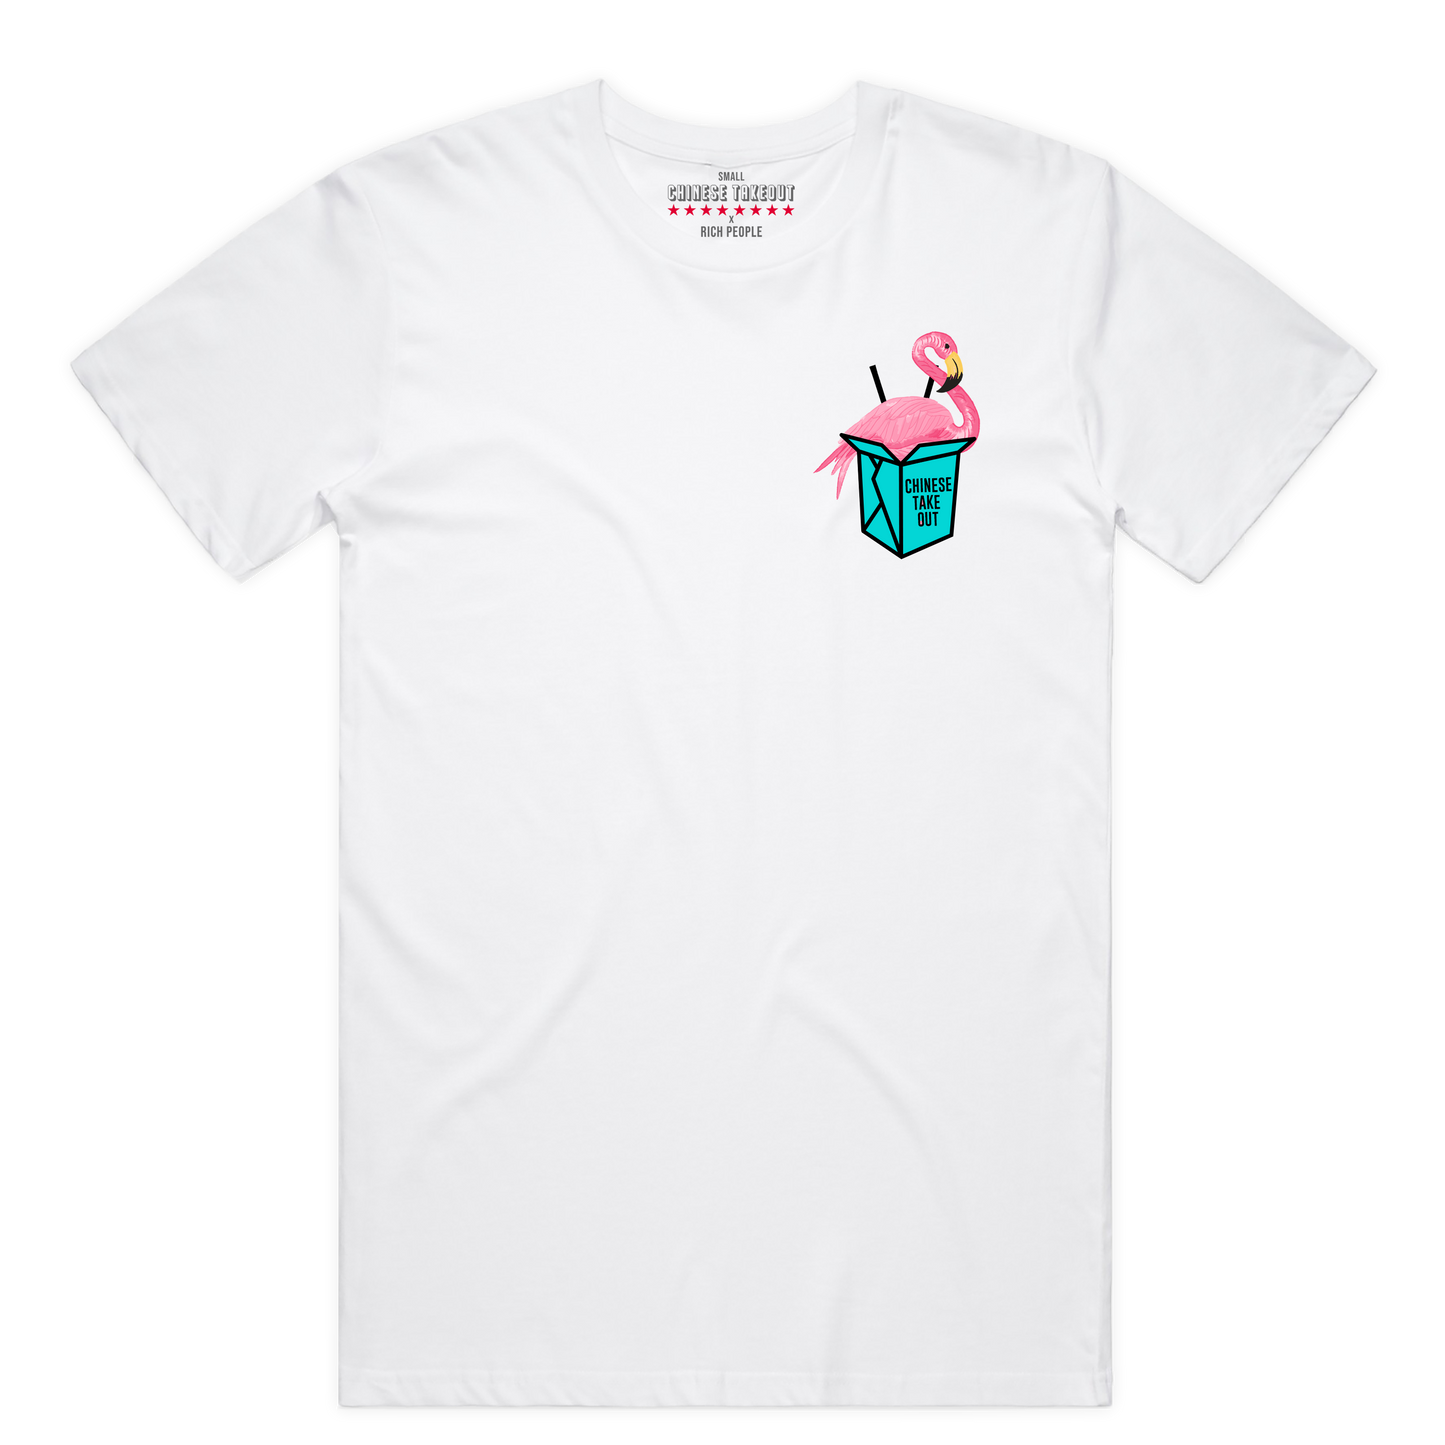 Chinese Takeout x Rich People  Flamingo Distressed Tear Tee (Wte/Pink/Blue) /D5